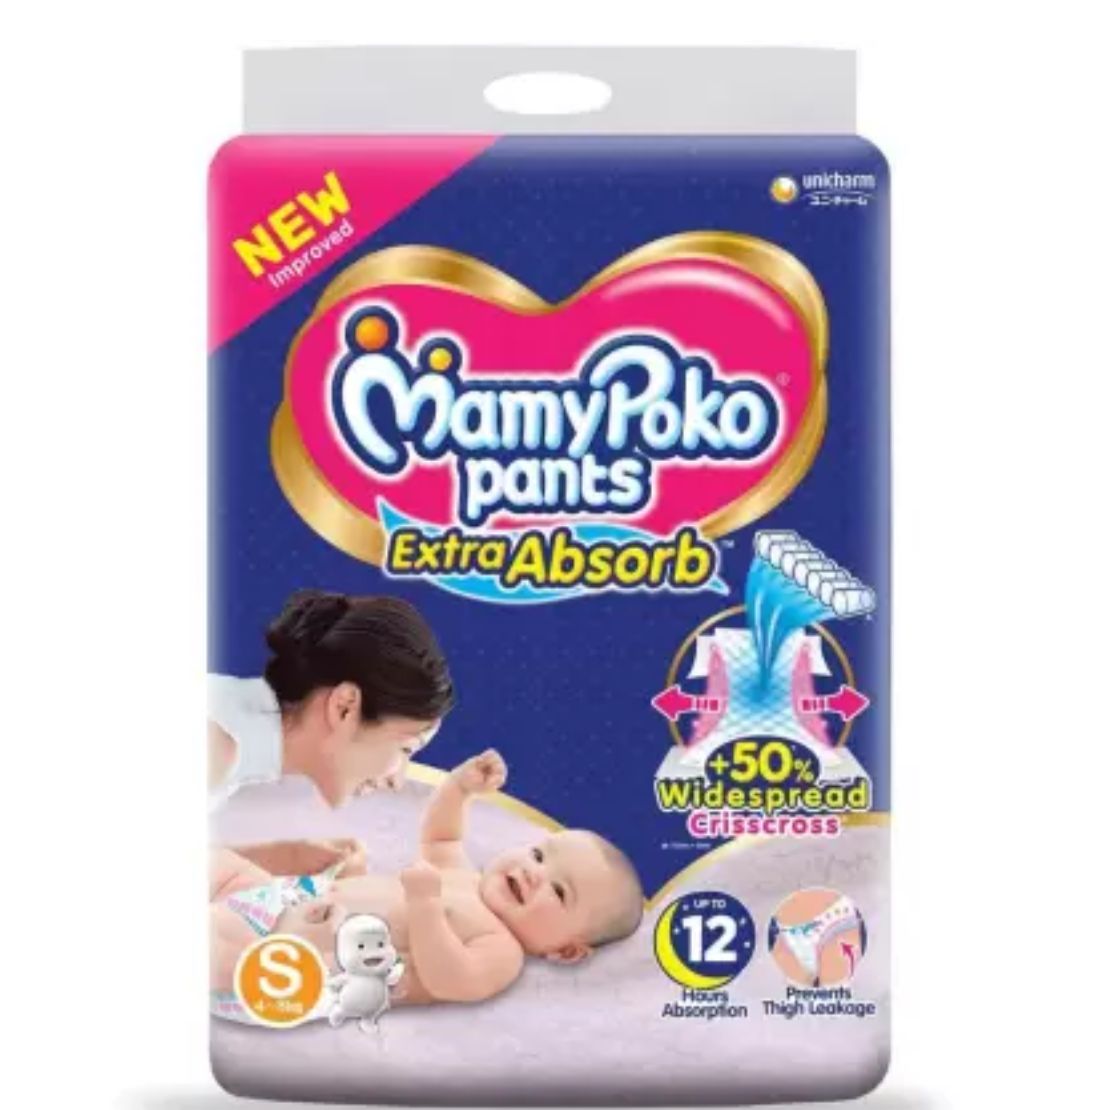 MamyPoko Pants Extra Absorb Diaper - Small Size